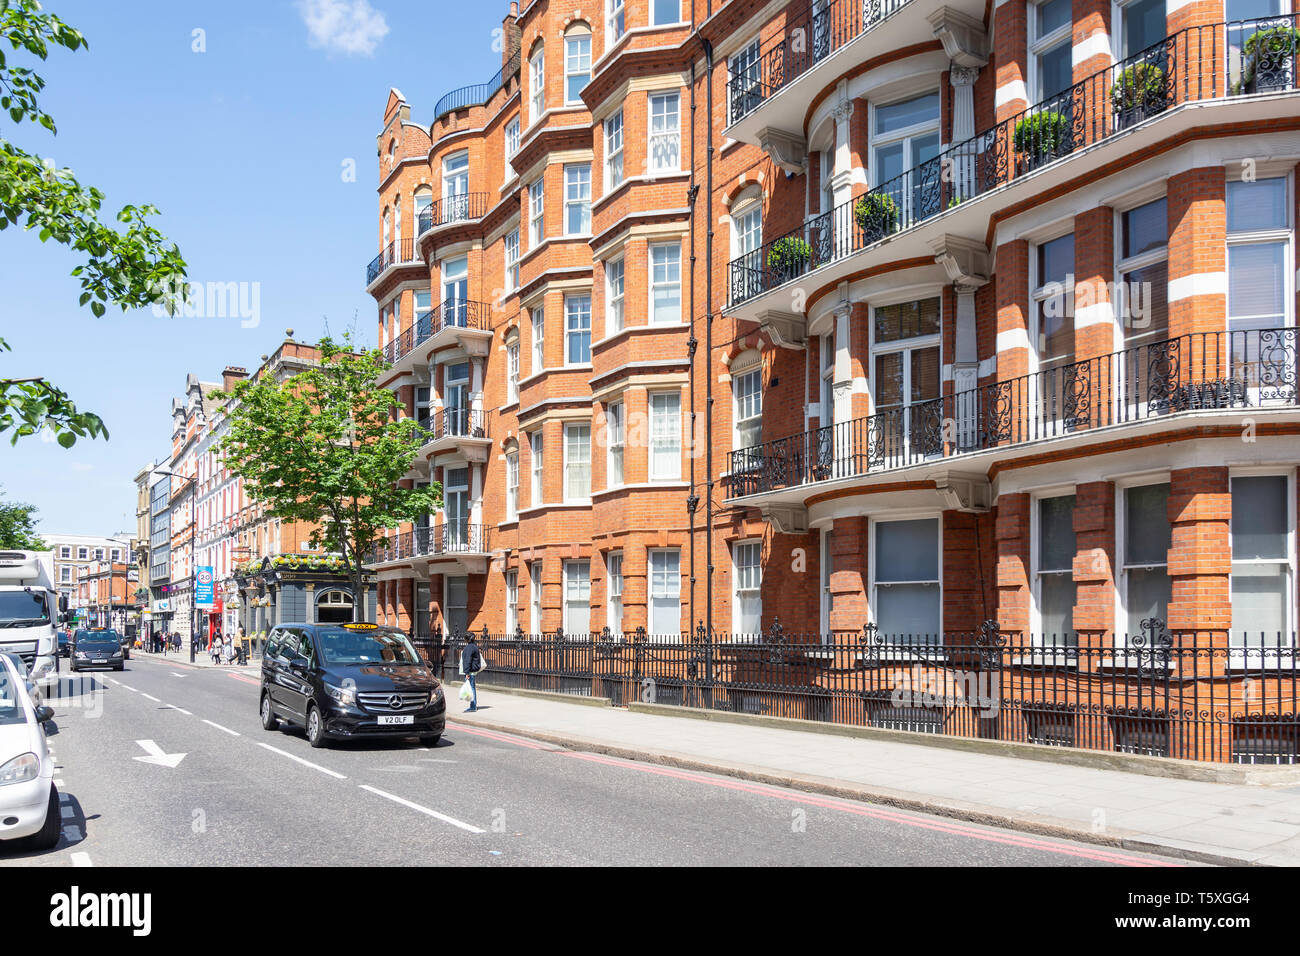 The Mansions apartment buildings, Earl's Court Road, Earls Court, Royal Borough of Kensington and Chelsea, Greater London, England, United Kingdom Stock Photo